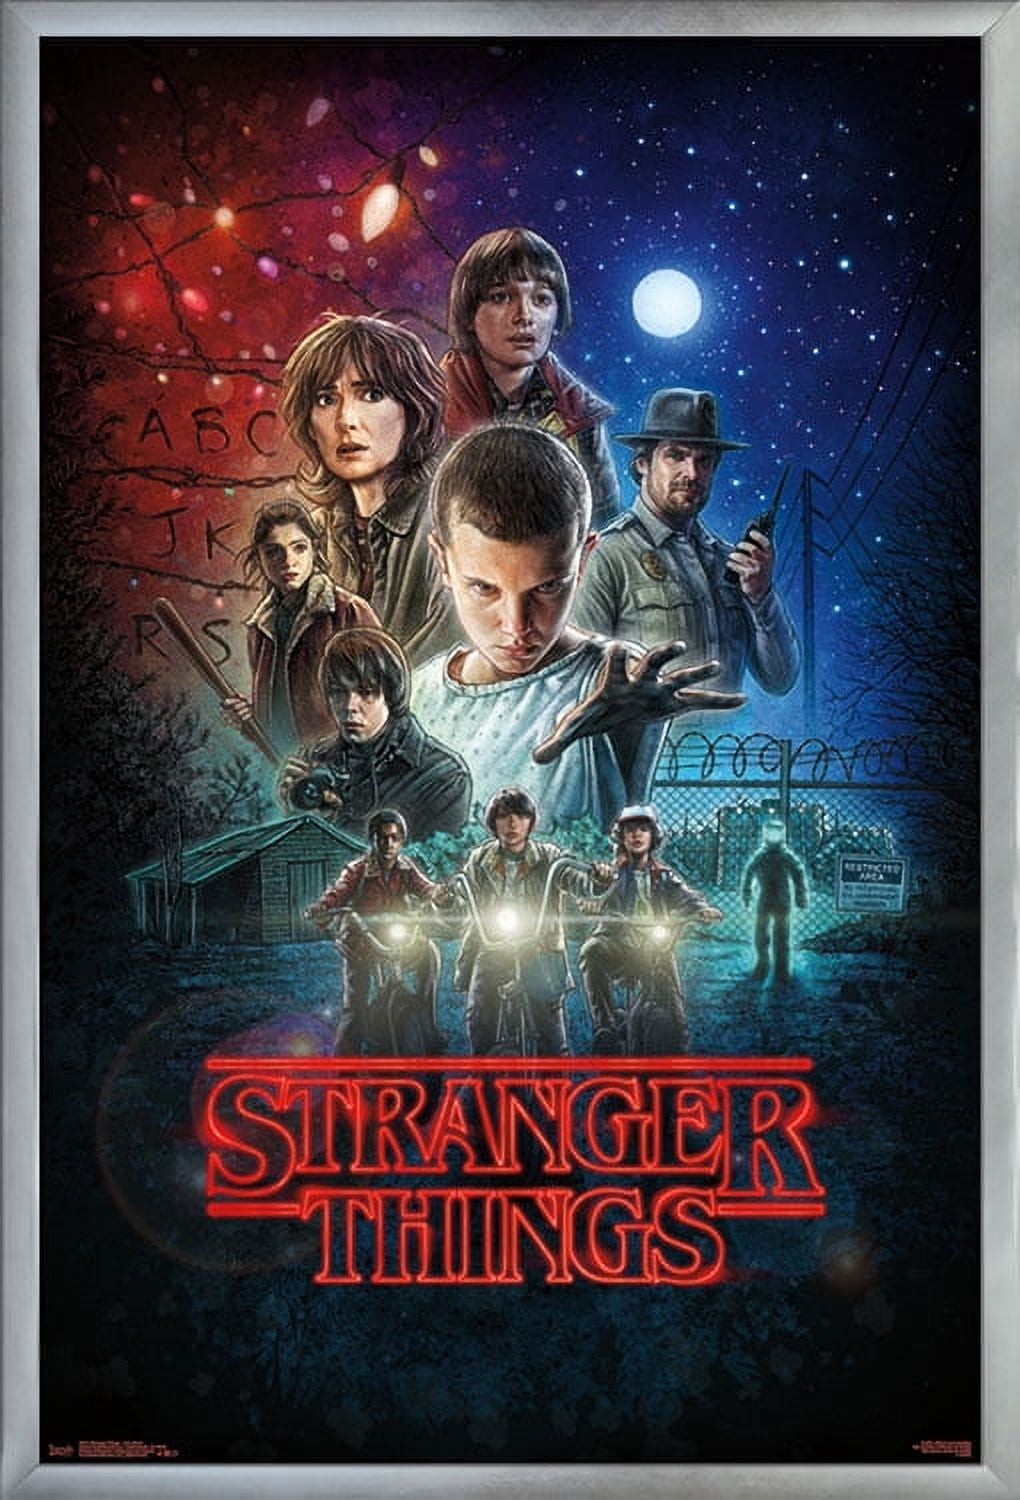 Netflix Stranger Things SIMPLE POSTER 27 oz Stainless